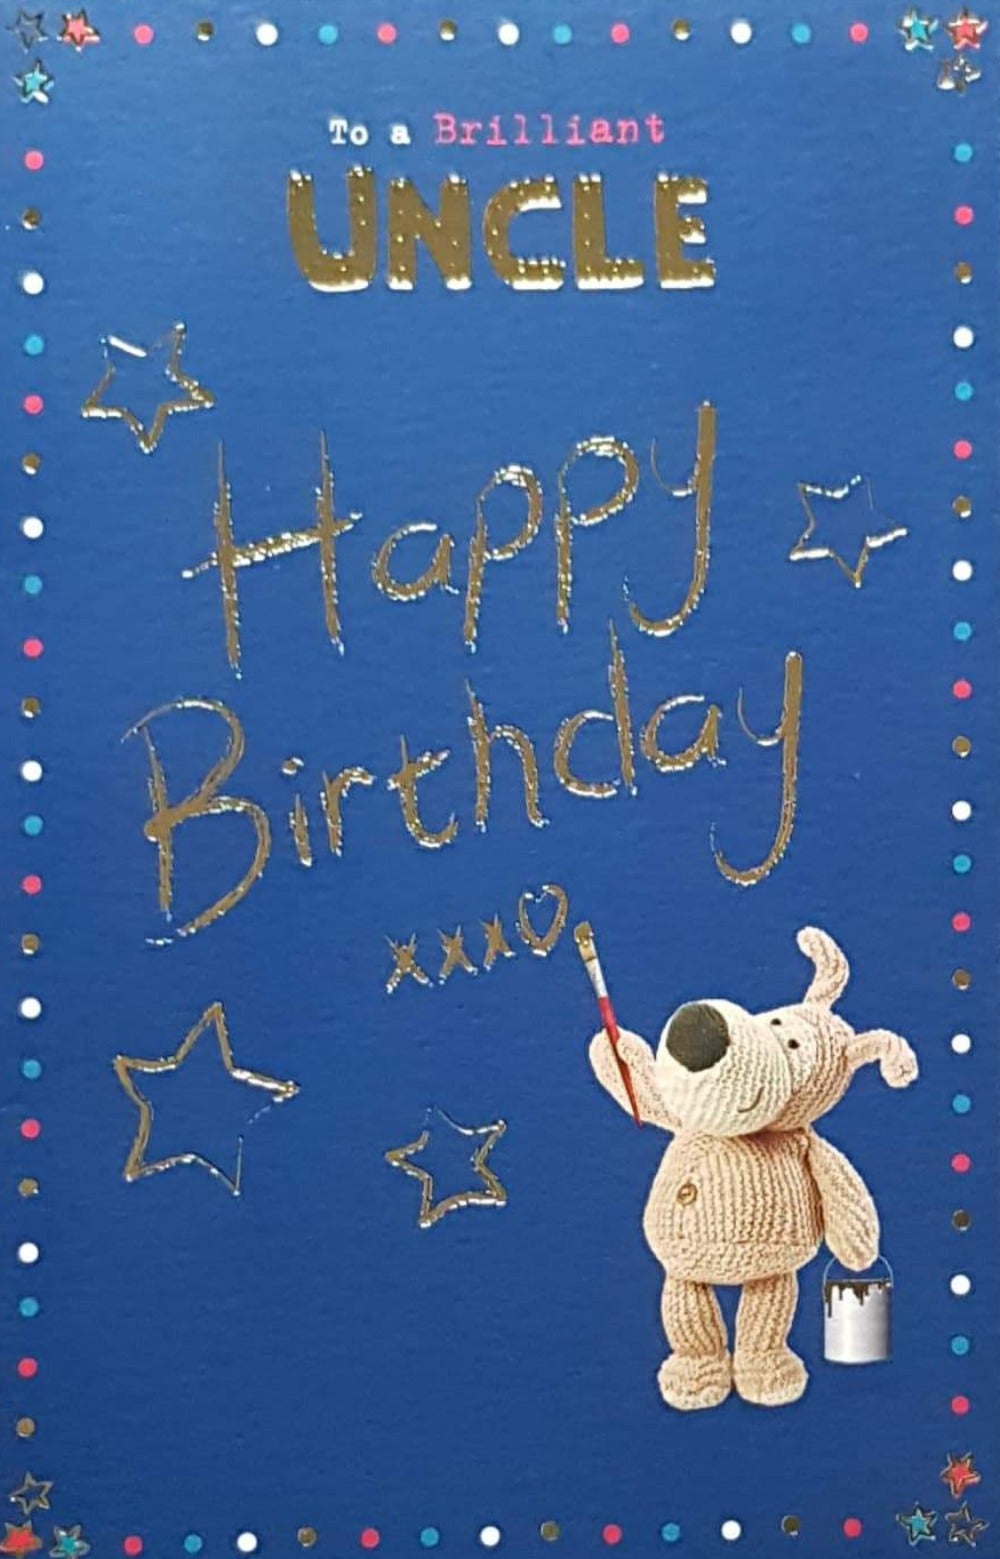 Birthday Card - Uncle / A Stuffed Dog Painting